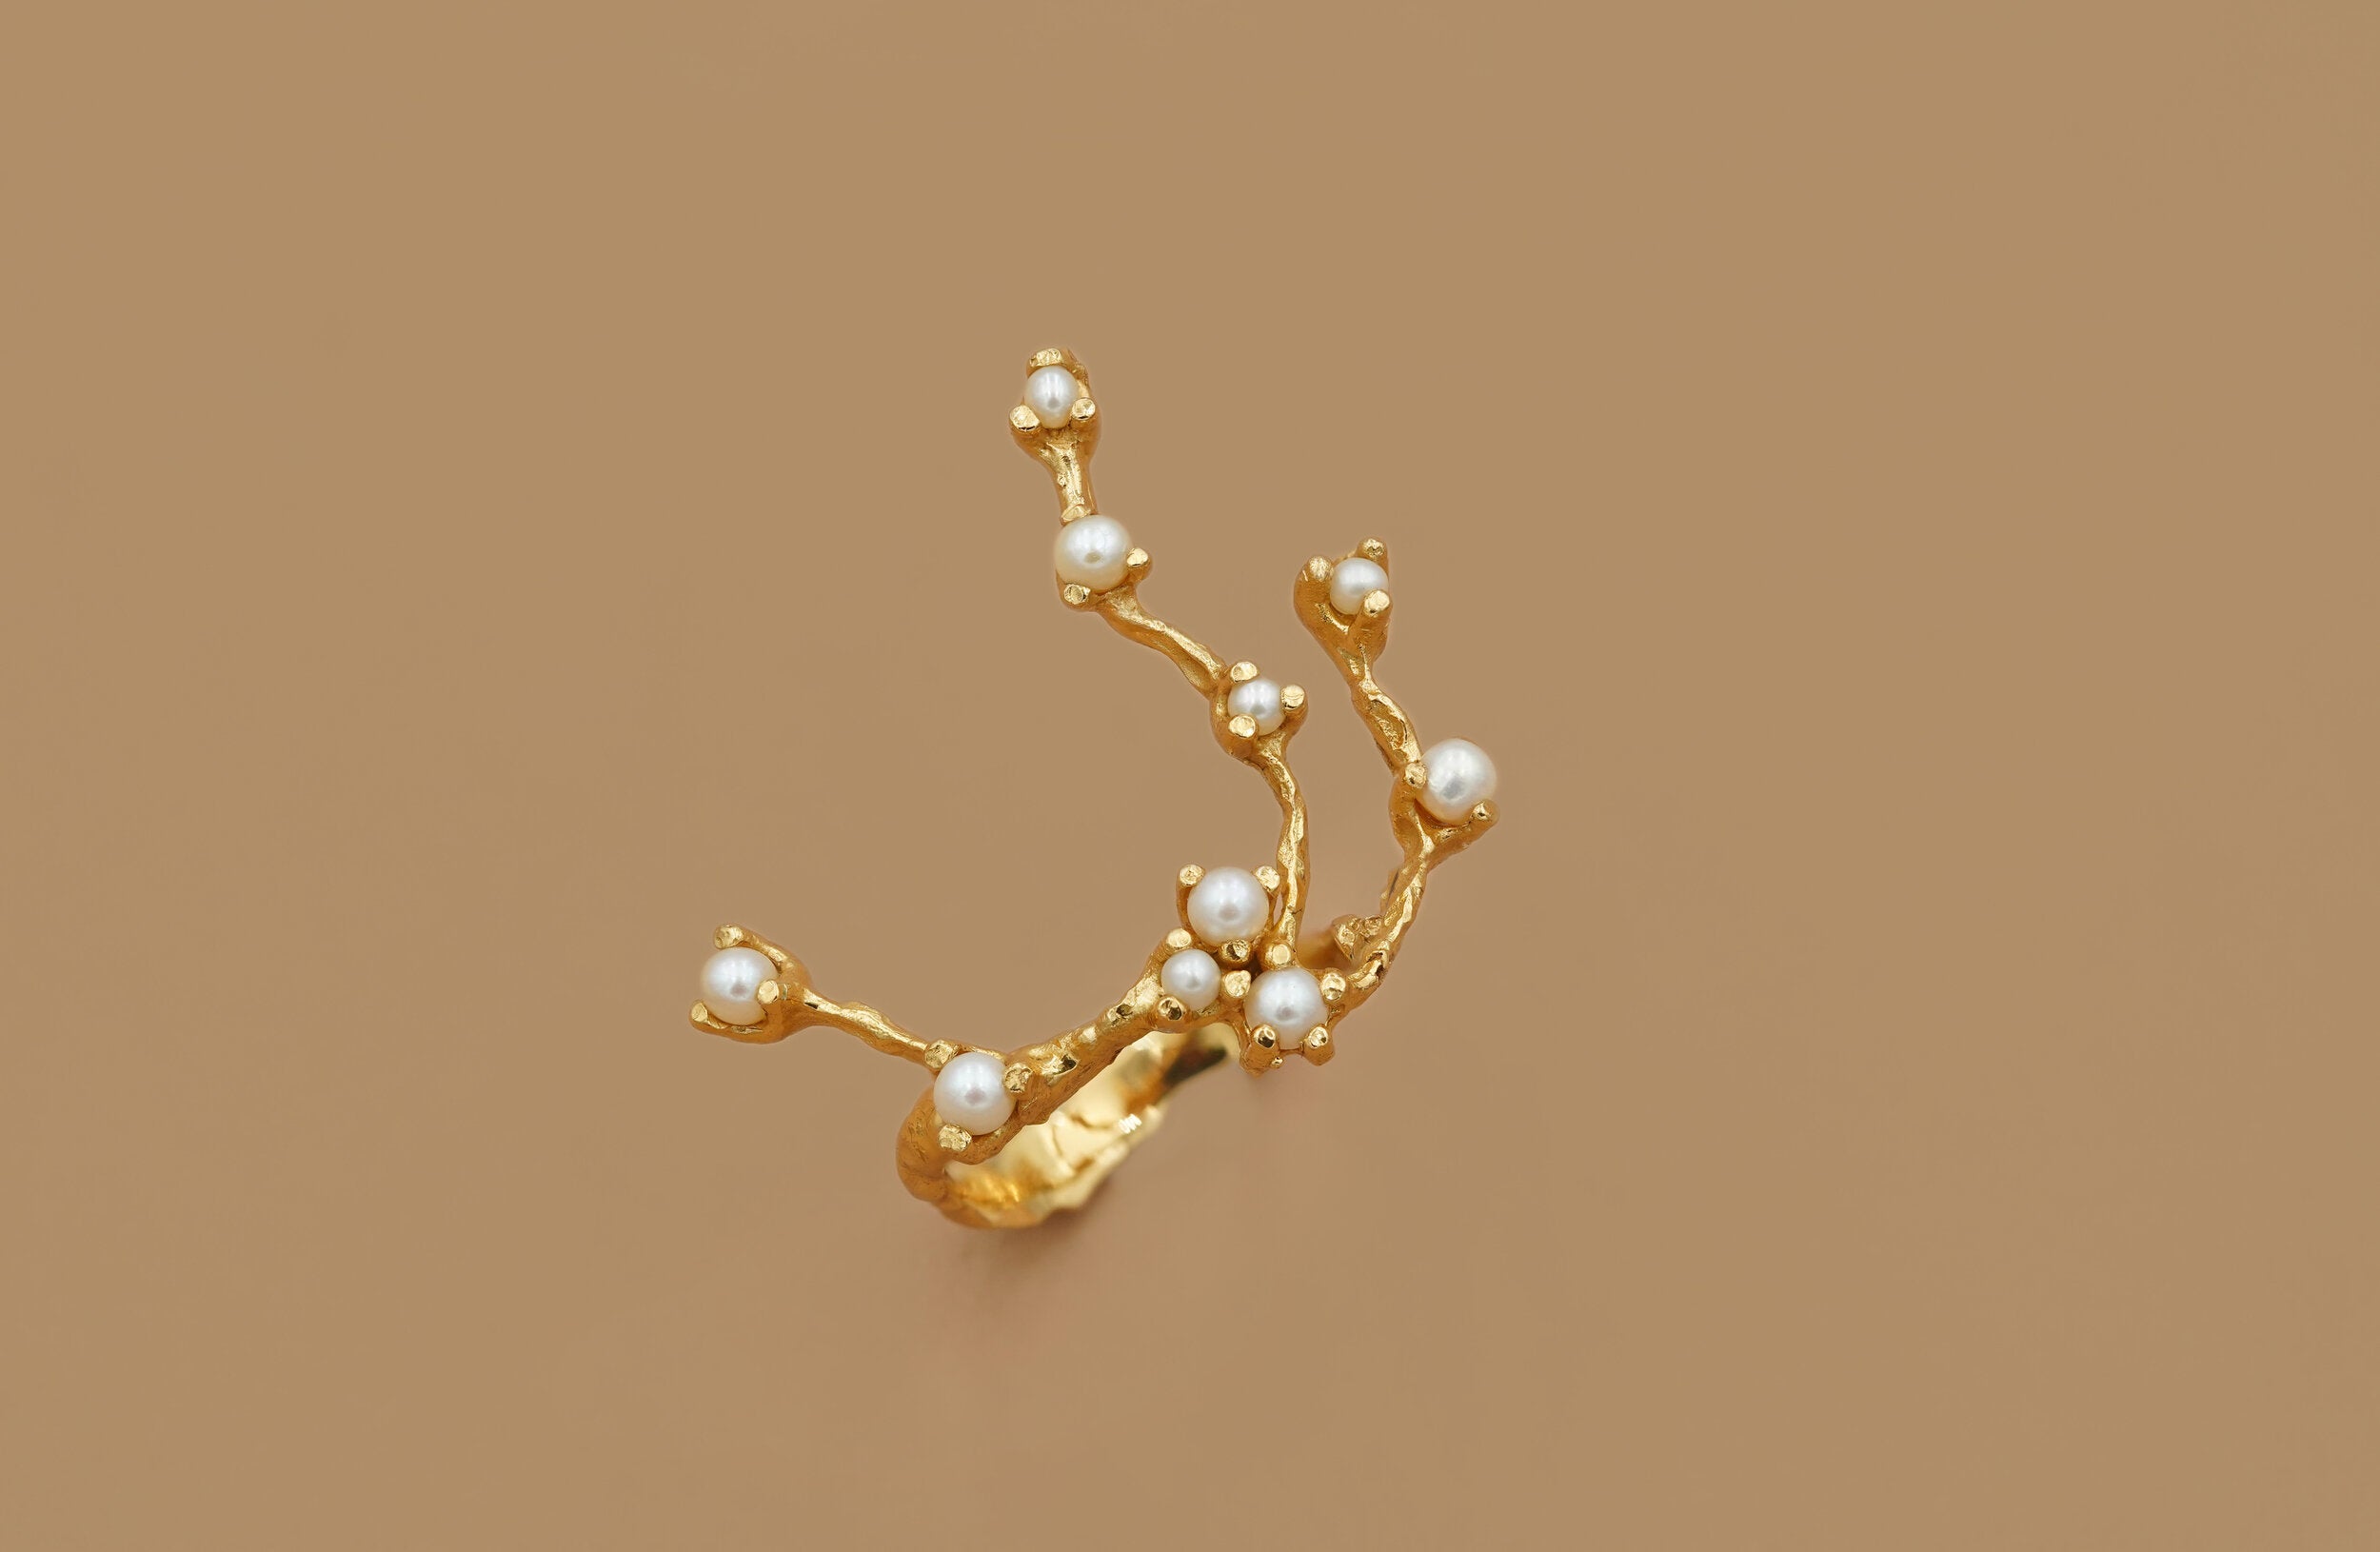 Star Child Ring - 18K Gold Plated